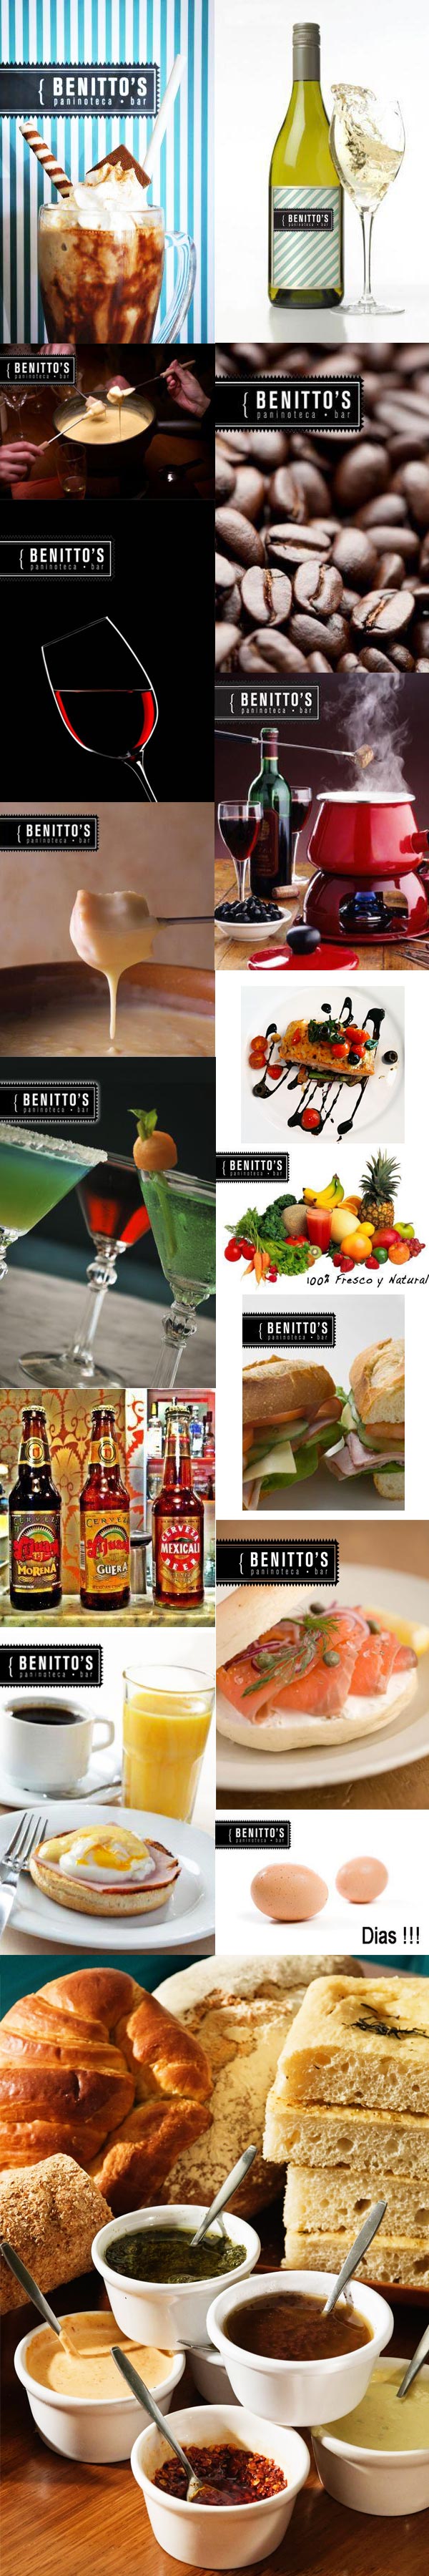 Whoever comes to Benitto's enters a universe where the food, wine, music and conversation between friends is one of those experiences that give flavor to every moment. Its menu, full of European memories, delights the palate while its relaxed atmosphere and unique personality, leading to discover the true meaning of the word flavor.